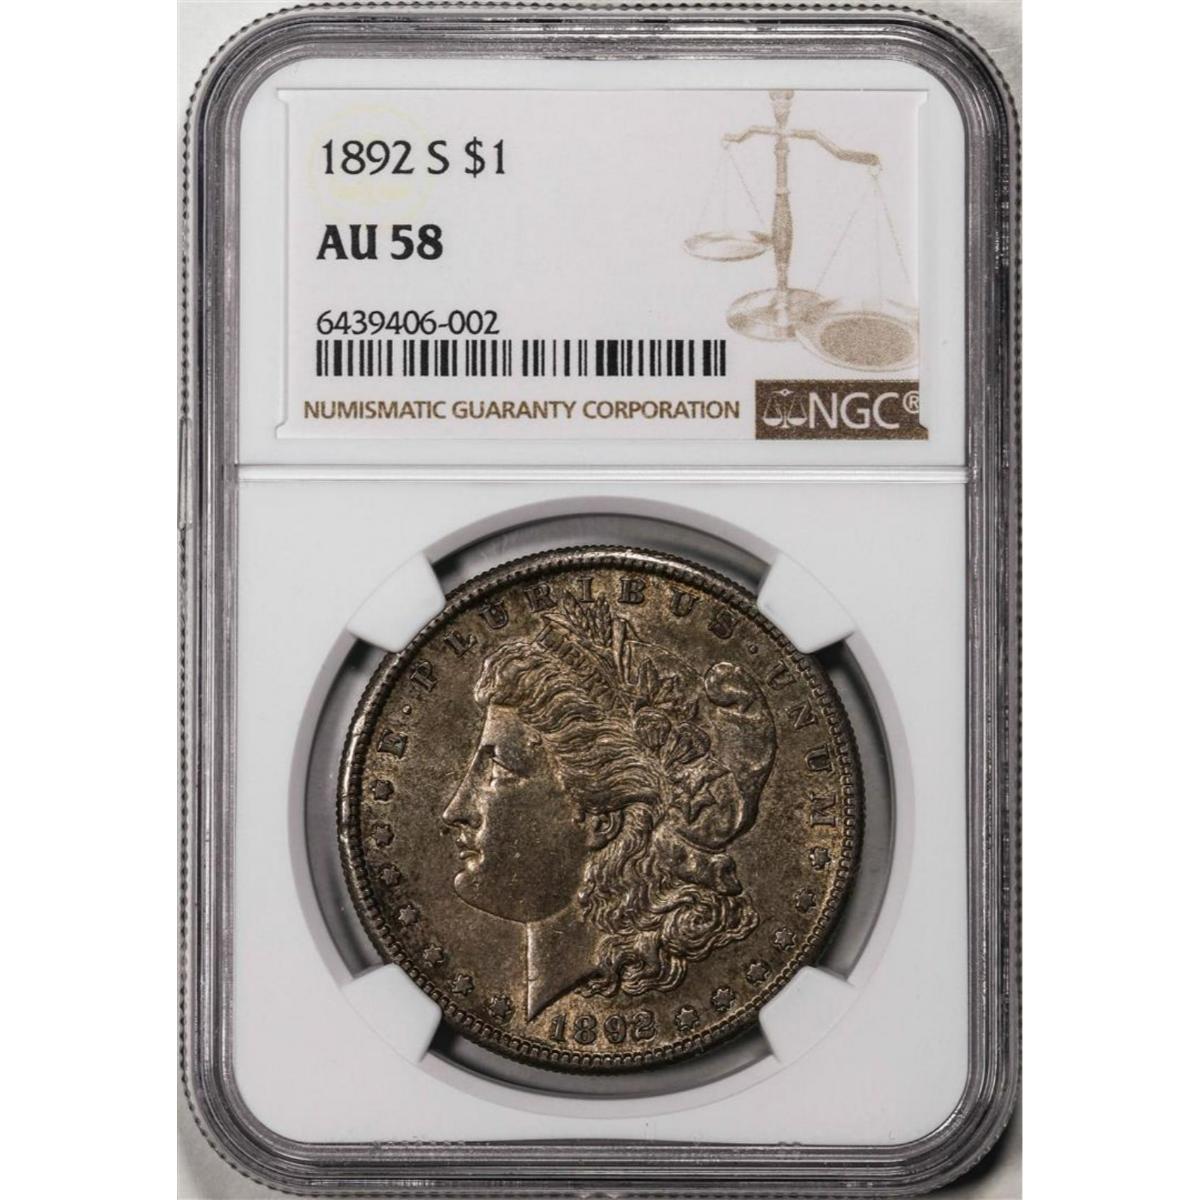 BK Auctions -Easter Sunday Coin & Currency Event With BKA!